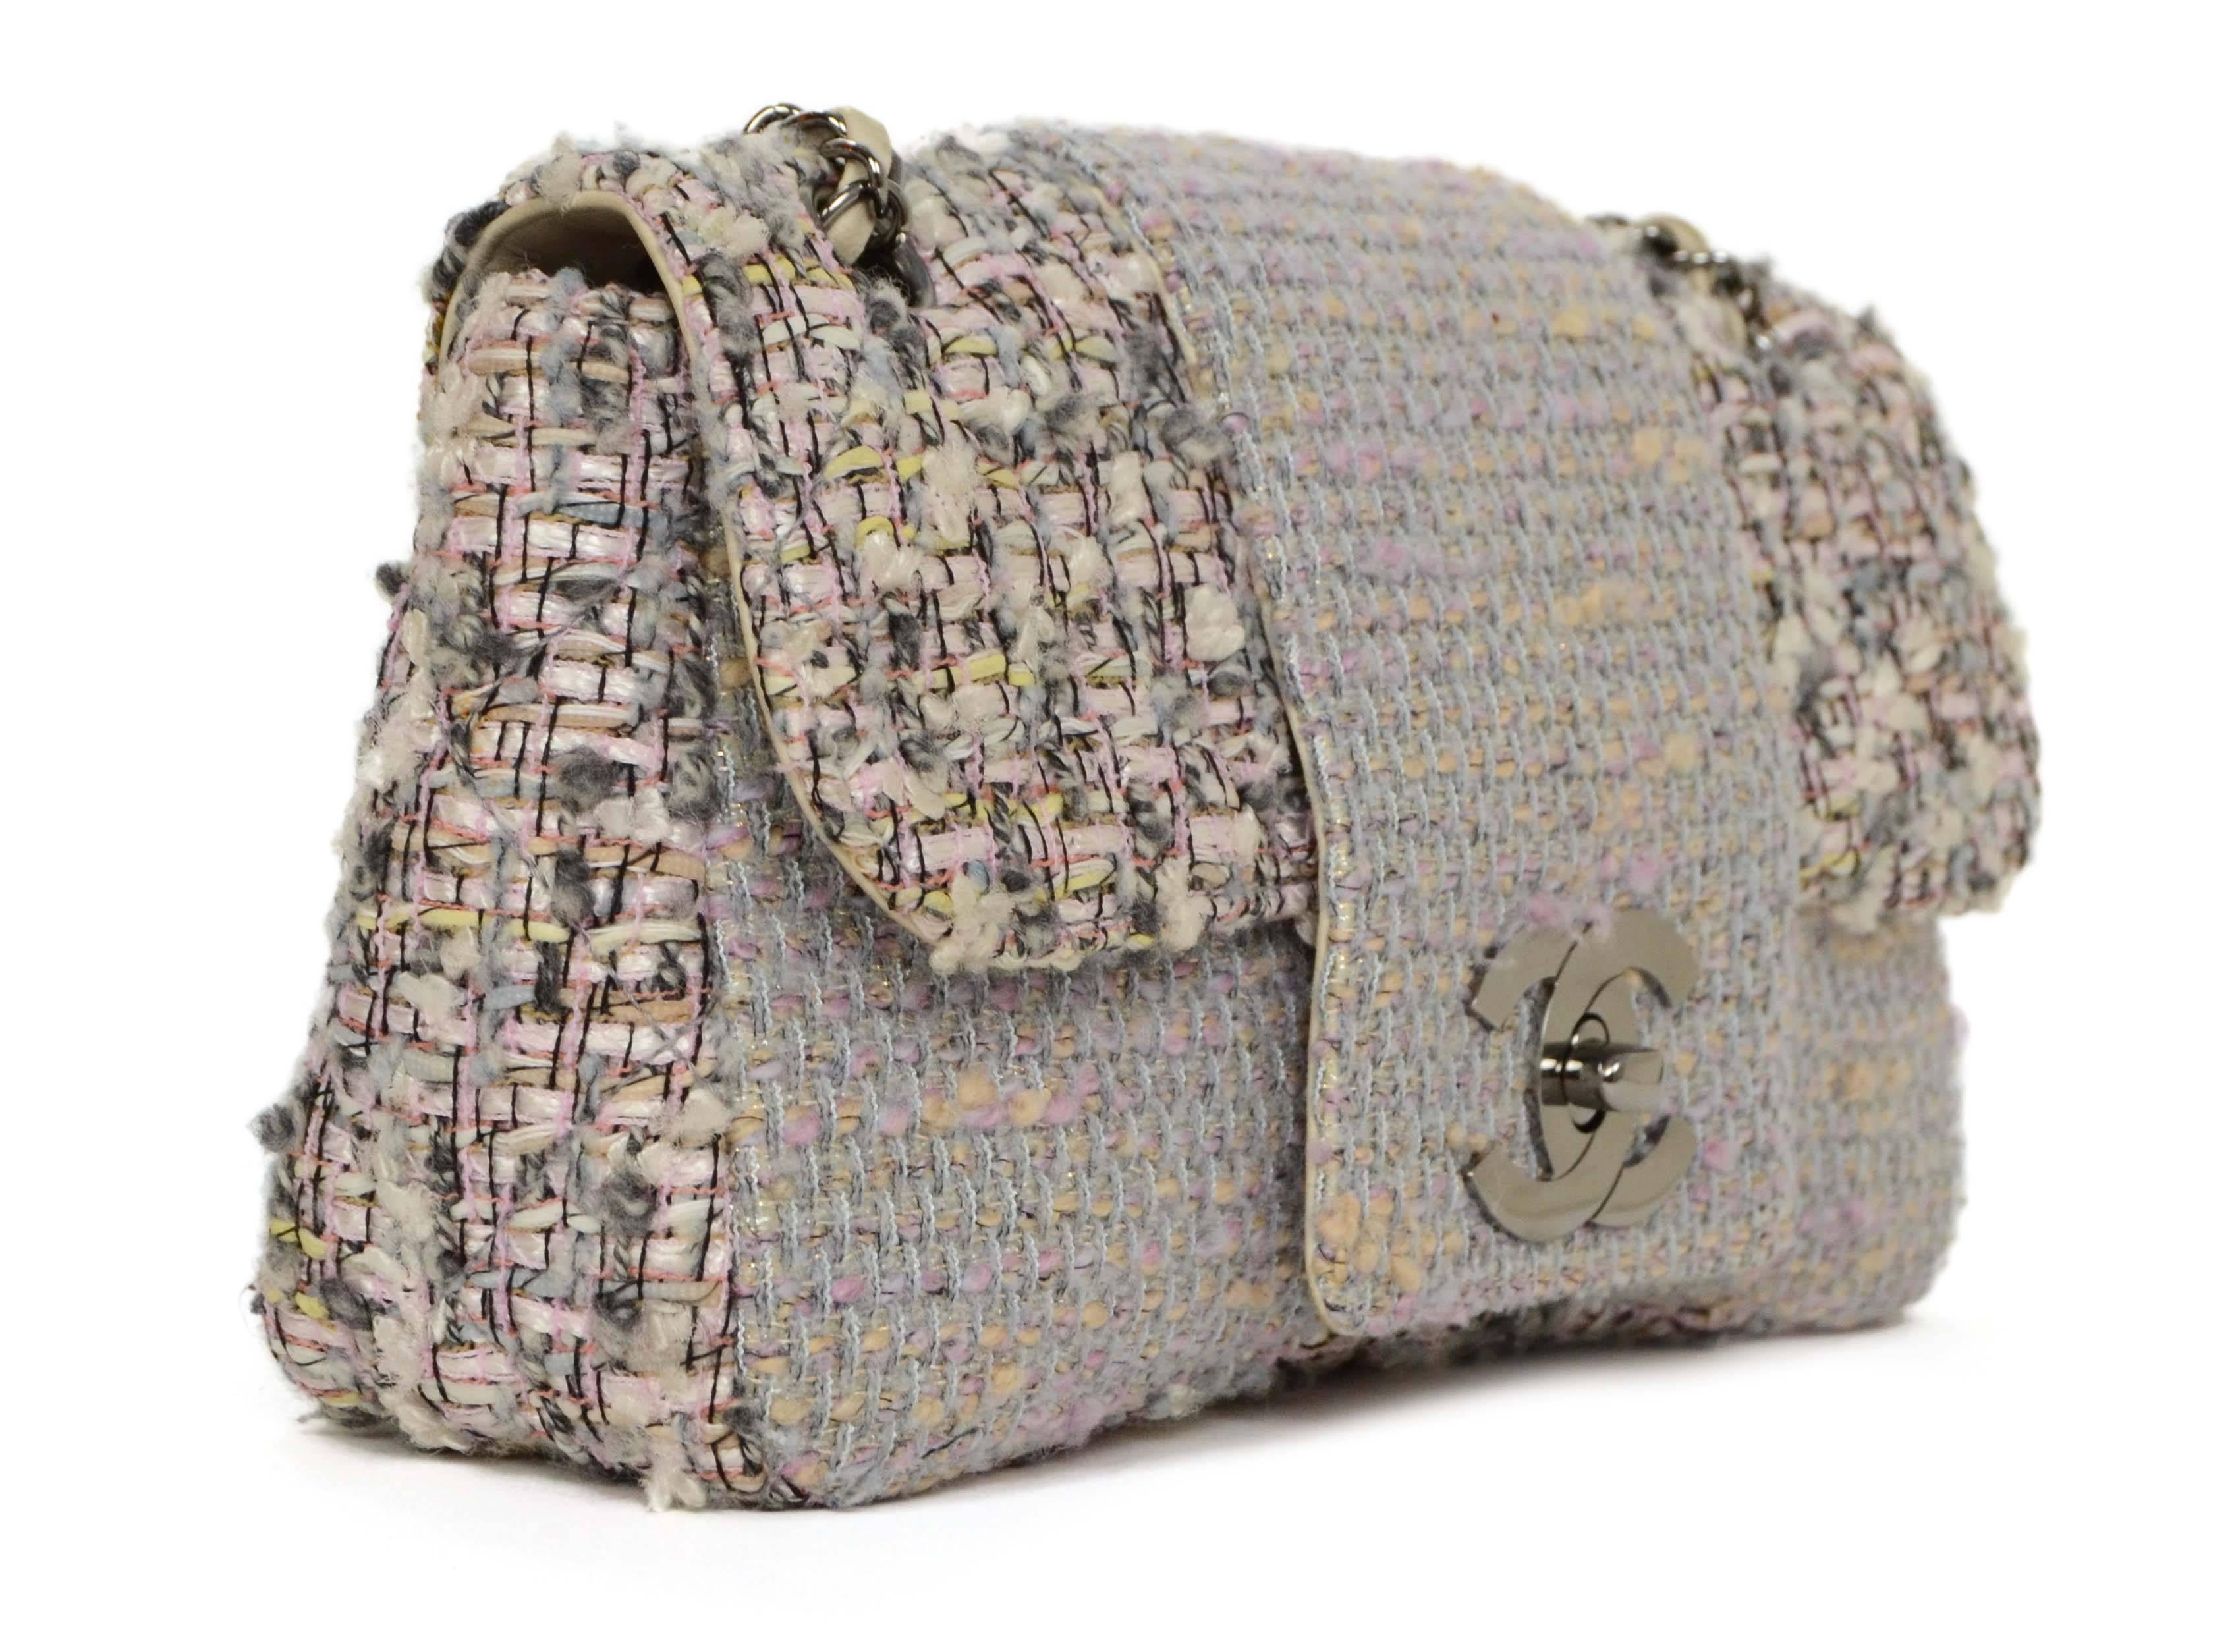 Chanel Pink & Grey Tweed Medium Classic Flap Bag 
Features metallic thread throughout creating a glitter effect to tweed
Made In: France
Year of Production: 2004-2005
Color: Pink, grey, ivory and black
Hardware: Ruthenium
Materials: Tweed,